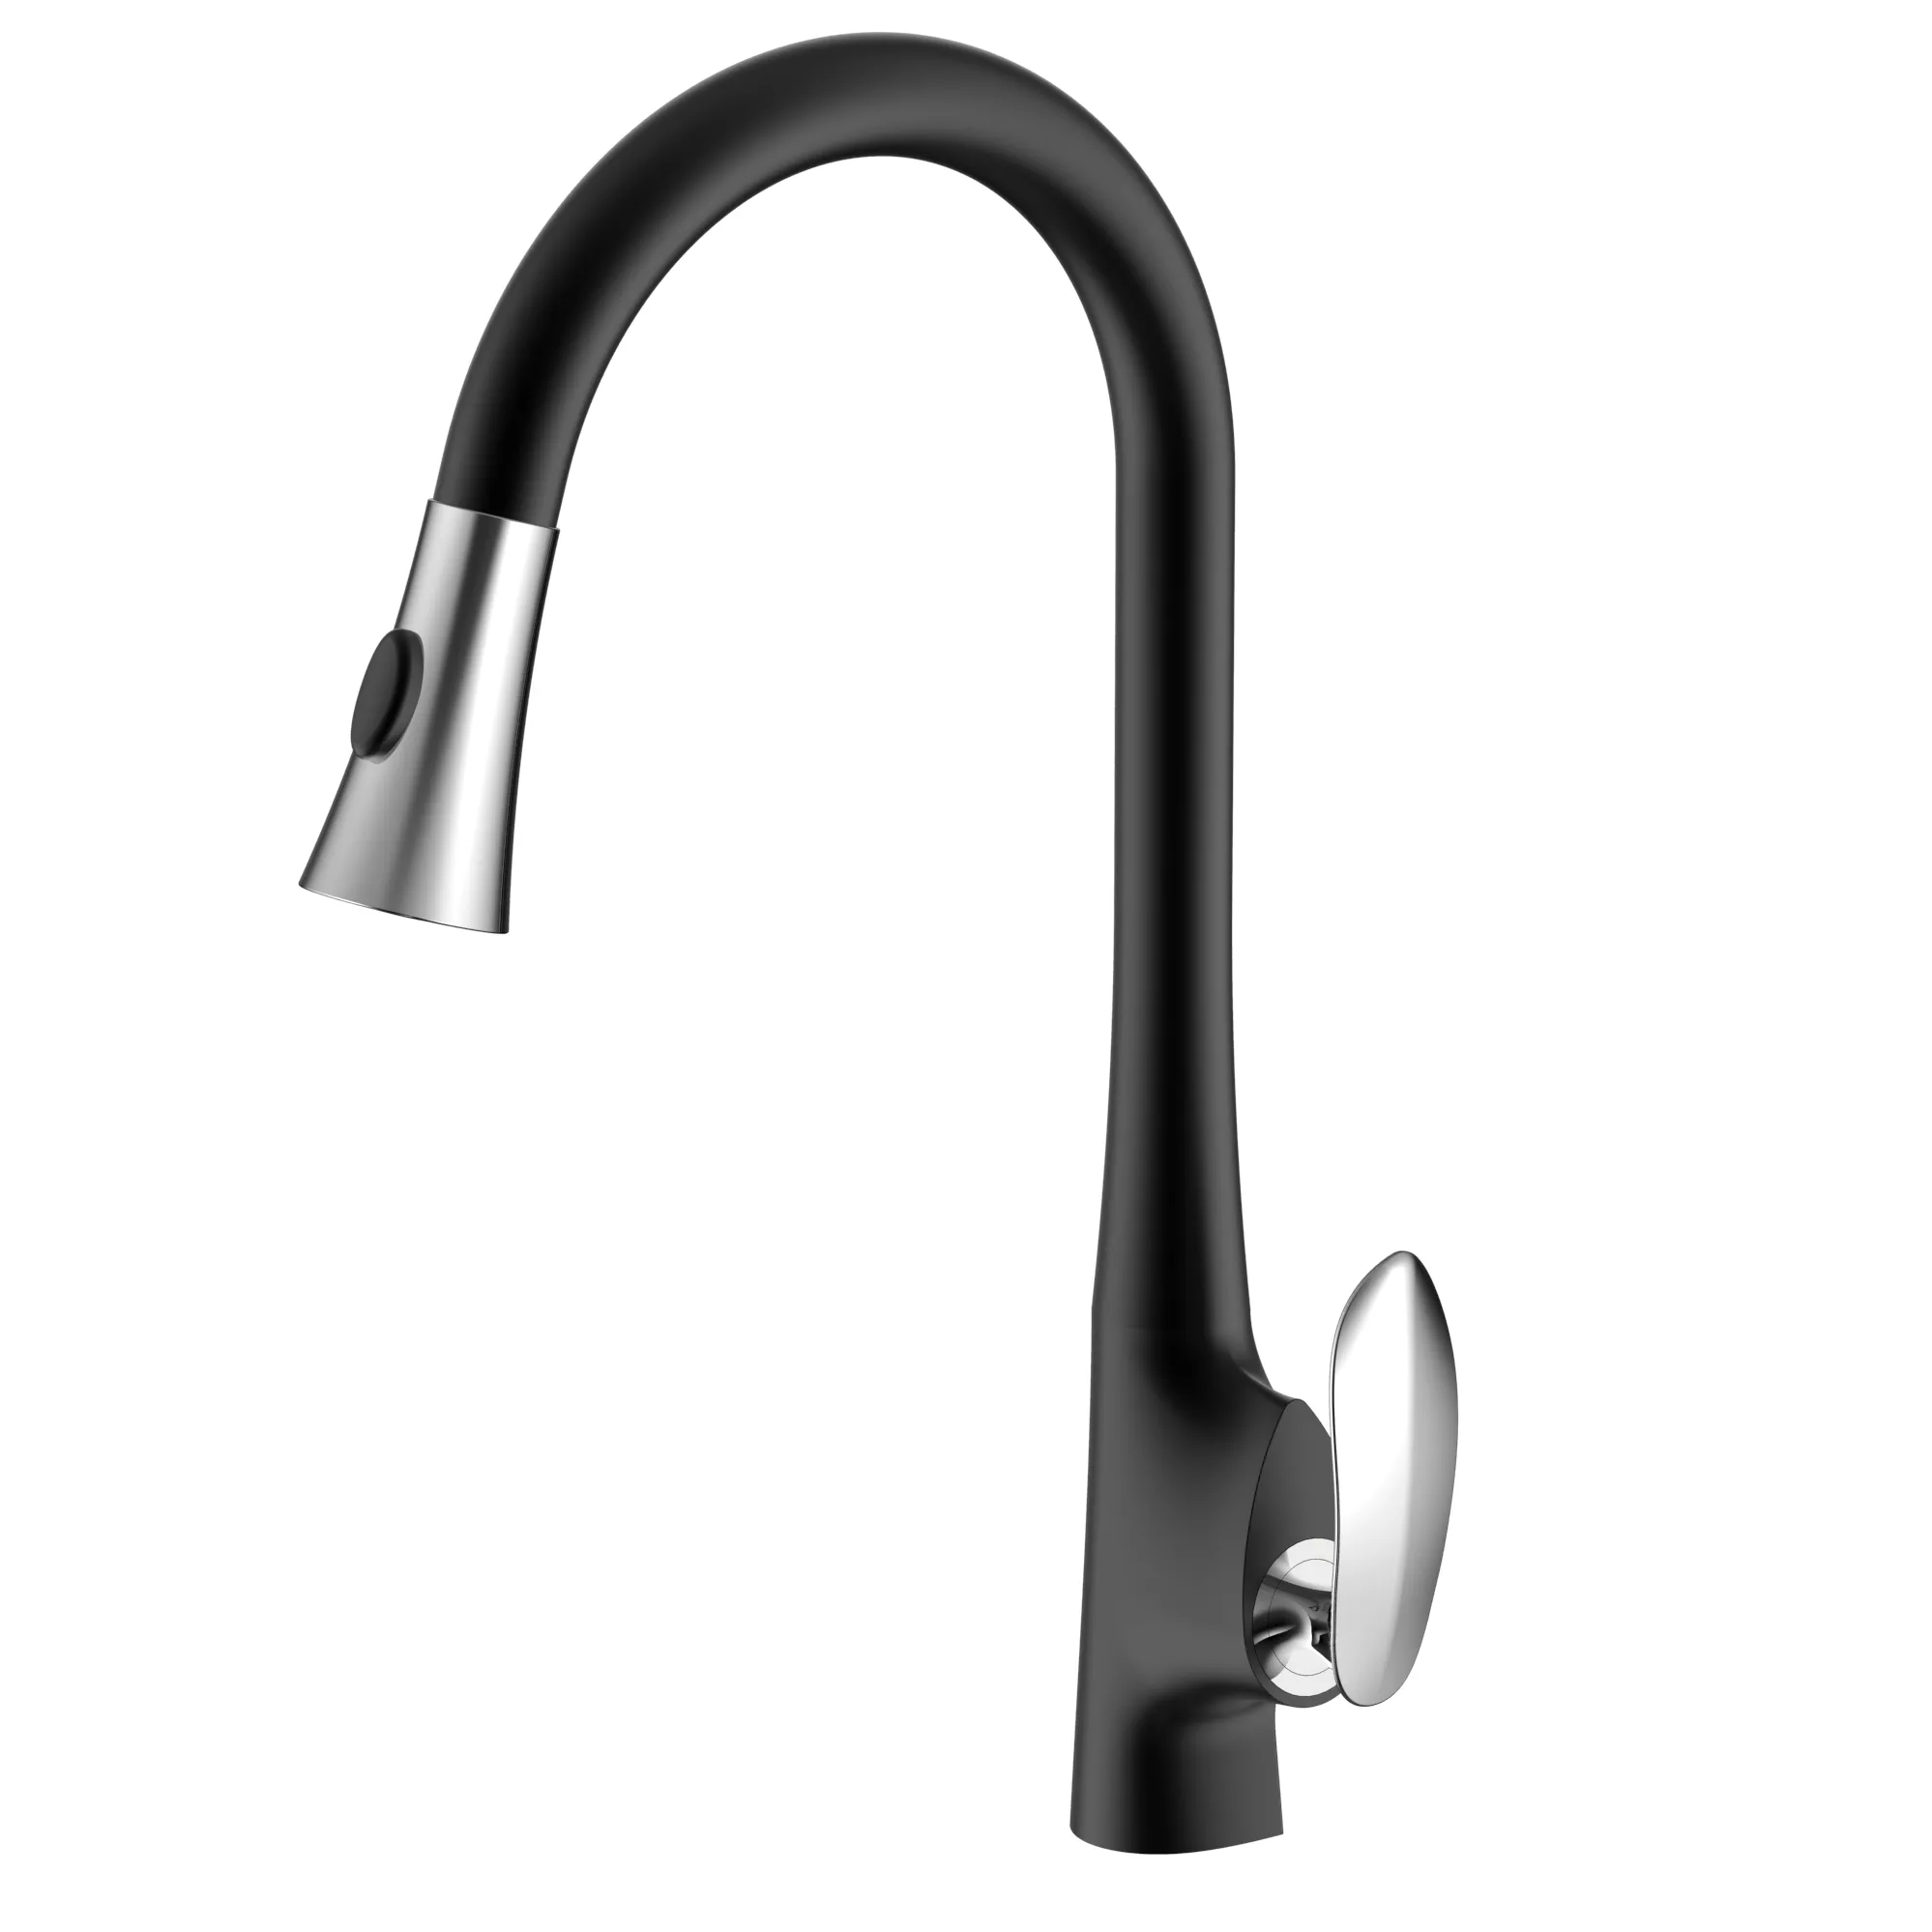 Brushed Rose Gold Kitchen Faucet Single Hole Pull Out Spout Kitchen Sink Mixer Tap Stream Sprayer Head